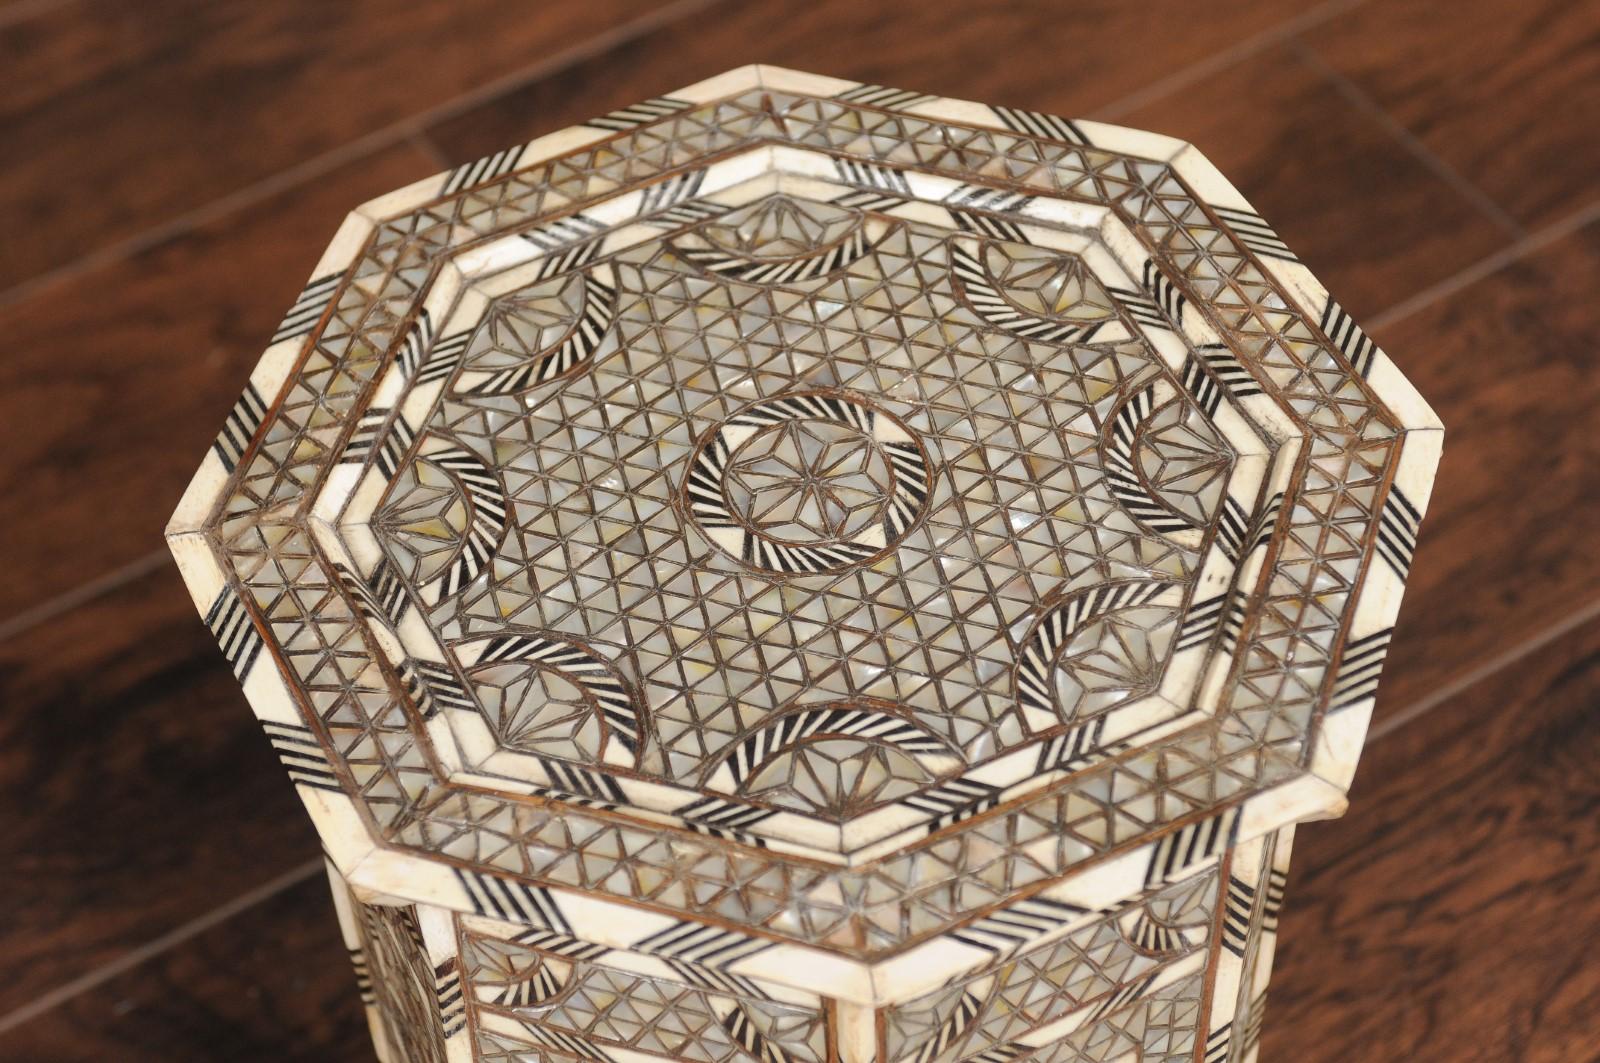 Syrian Moorish Style Hexagonal Side Table with Mother of Pearl and Bone Inlay 7